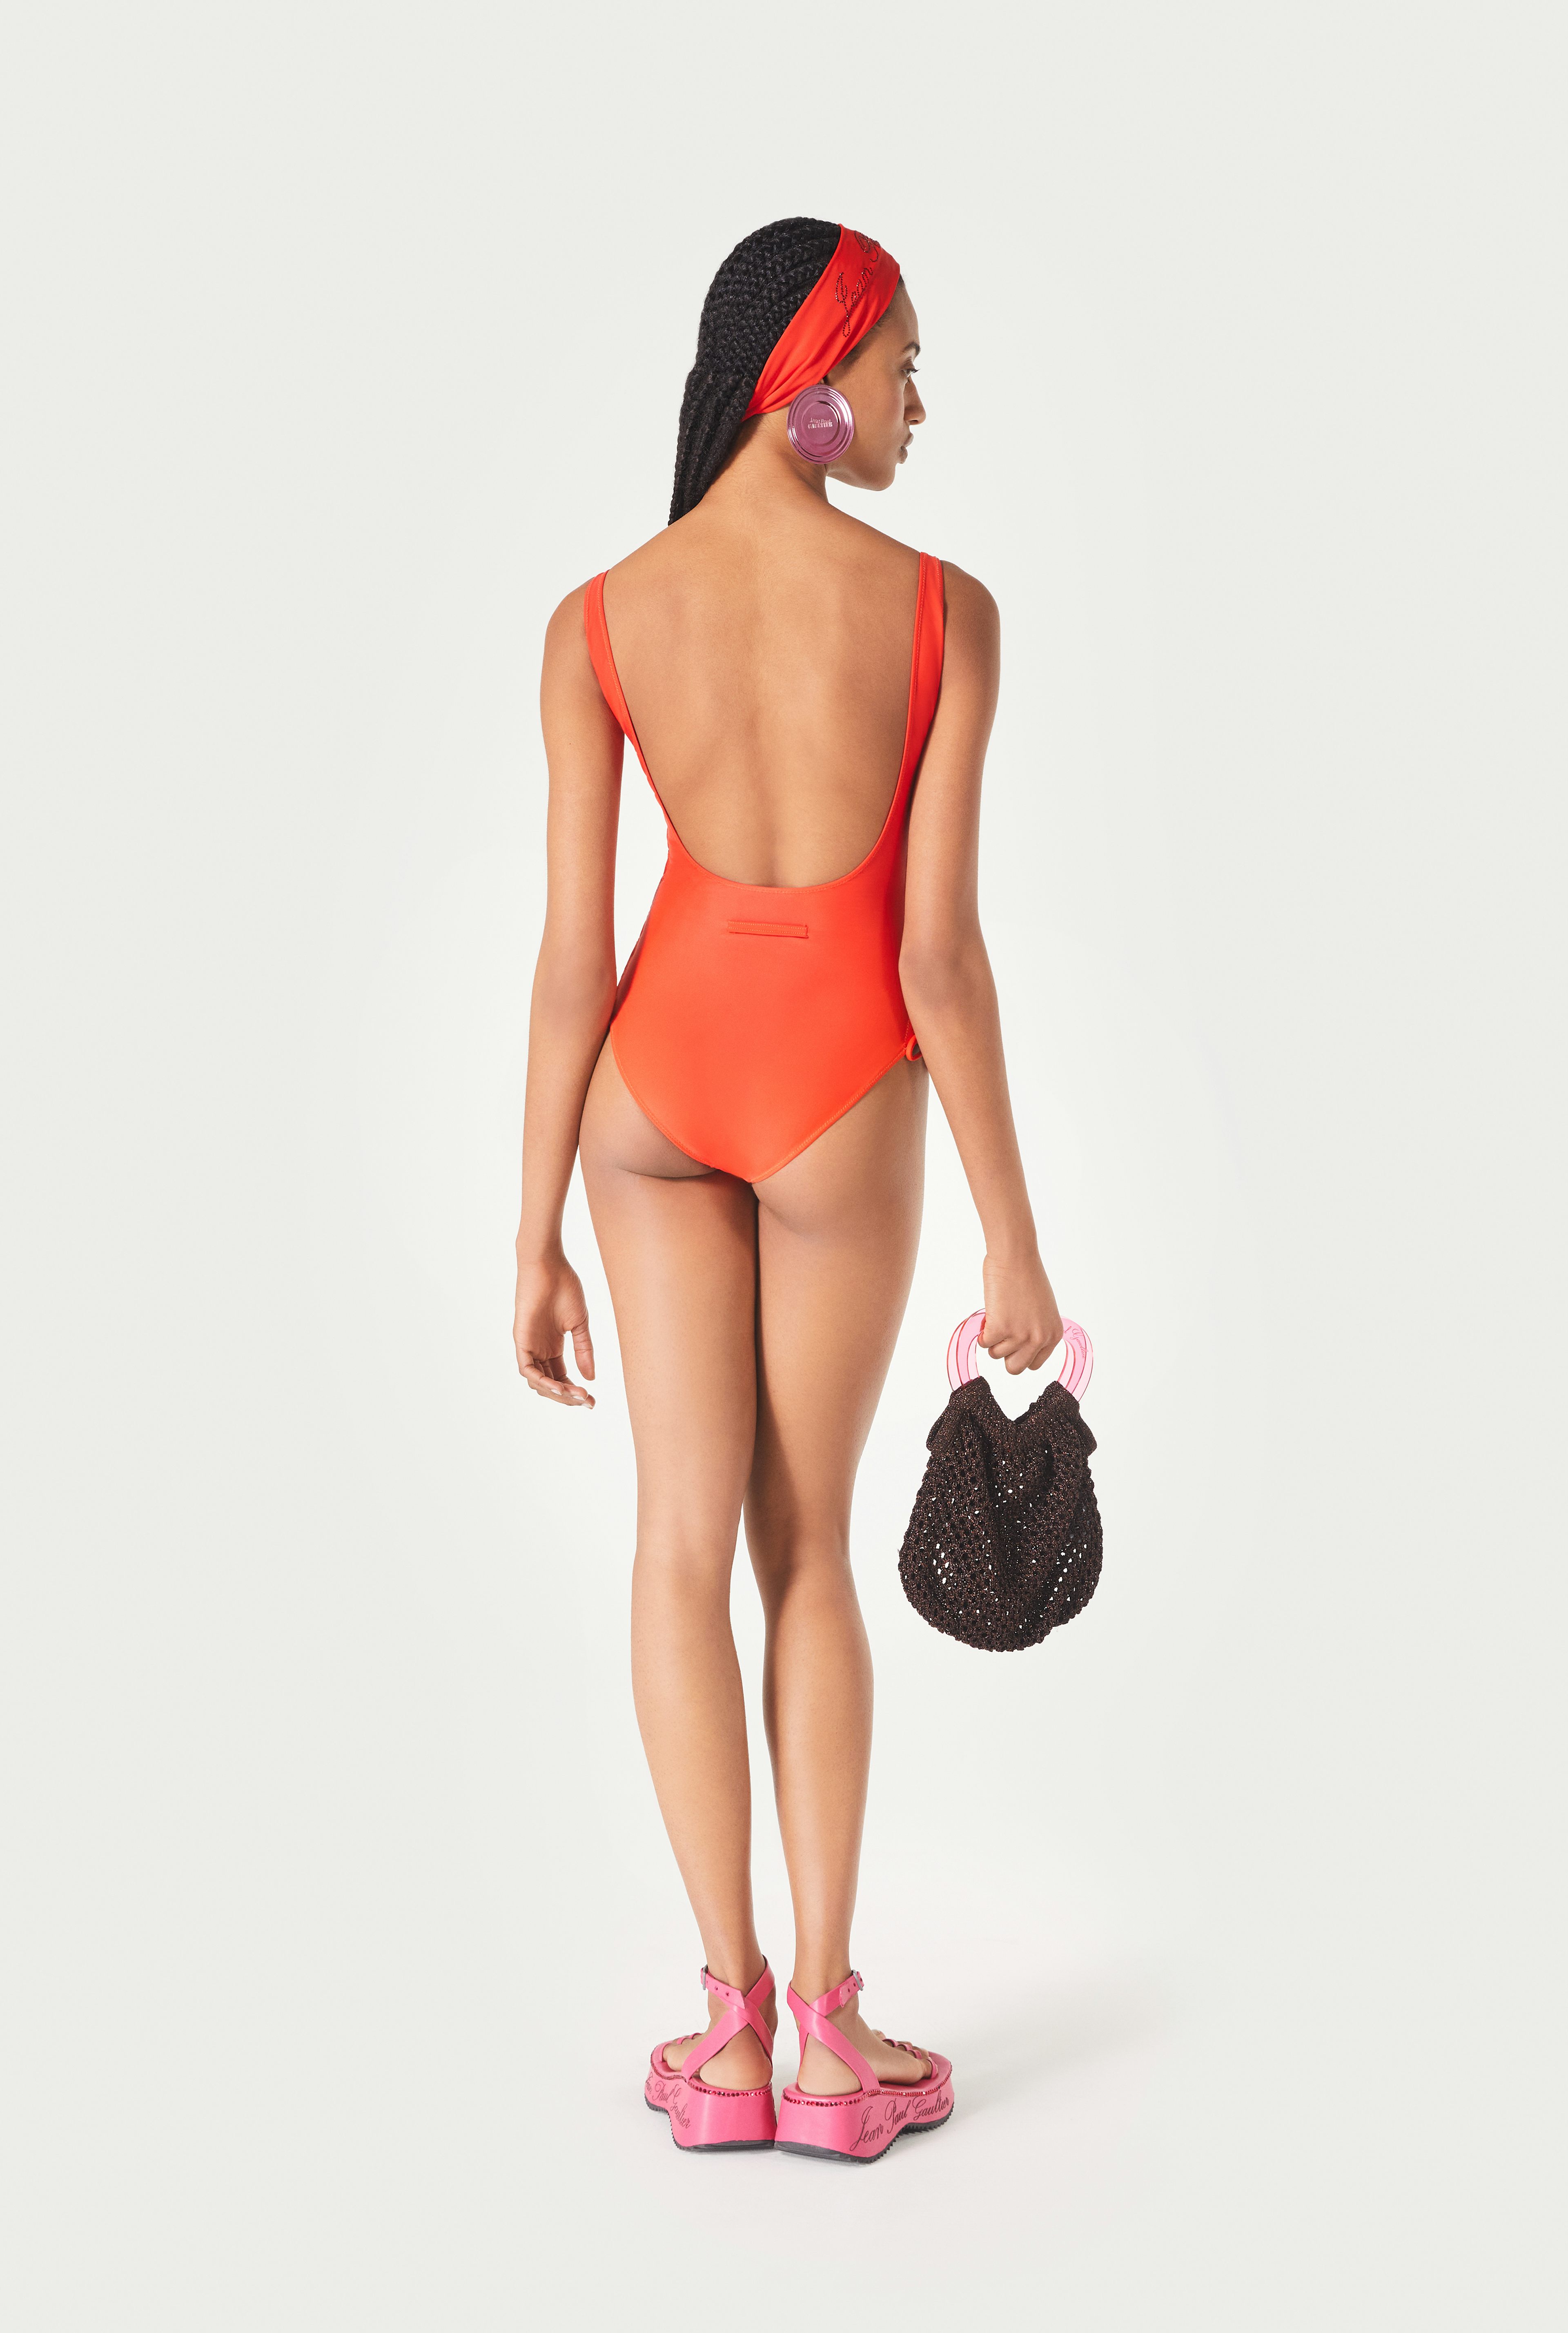 Exclusive - The Red Évidemment Swimsuit